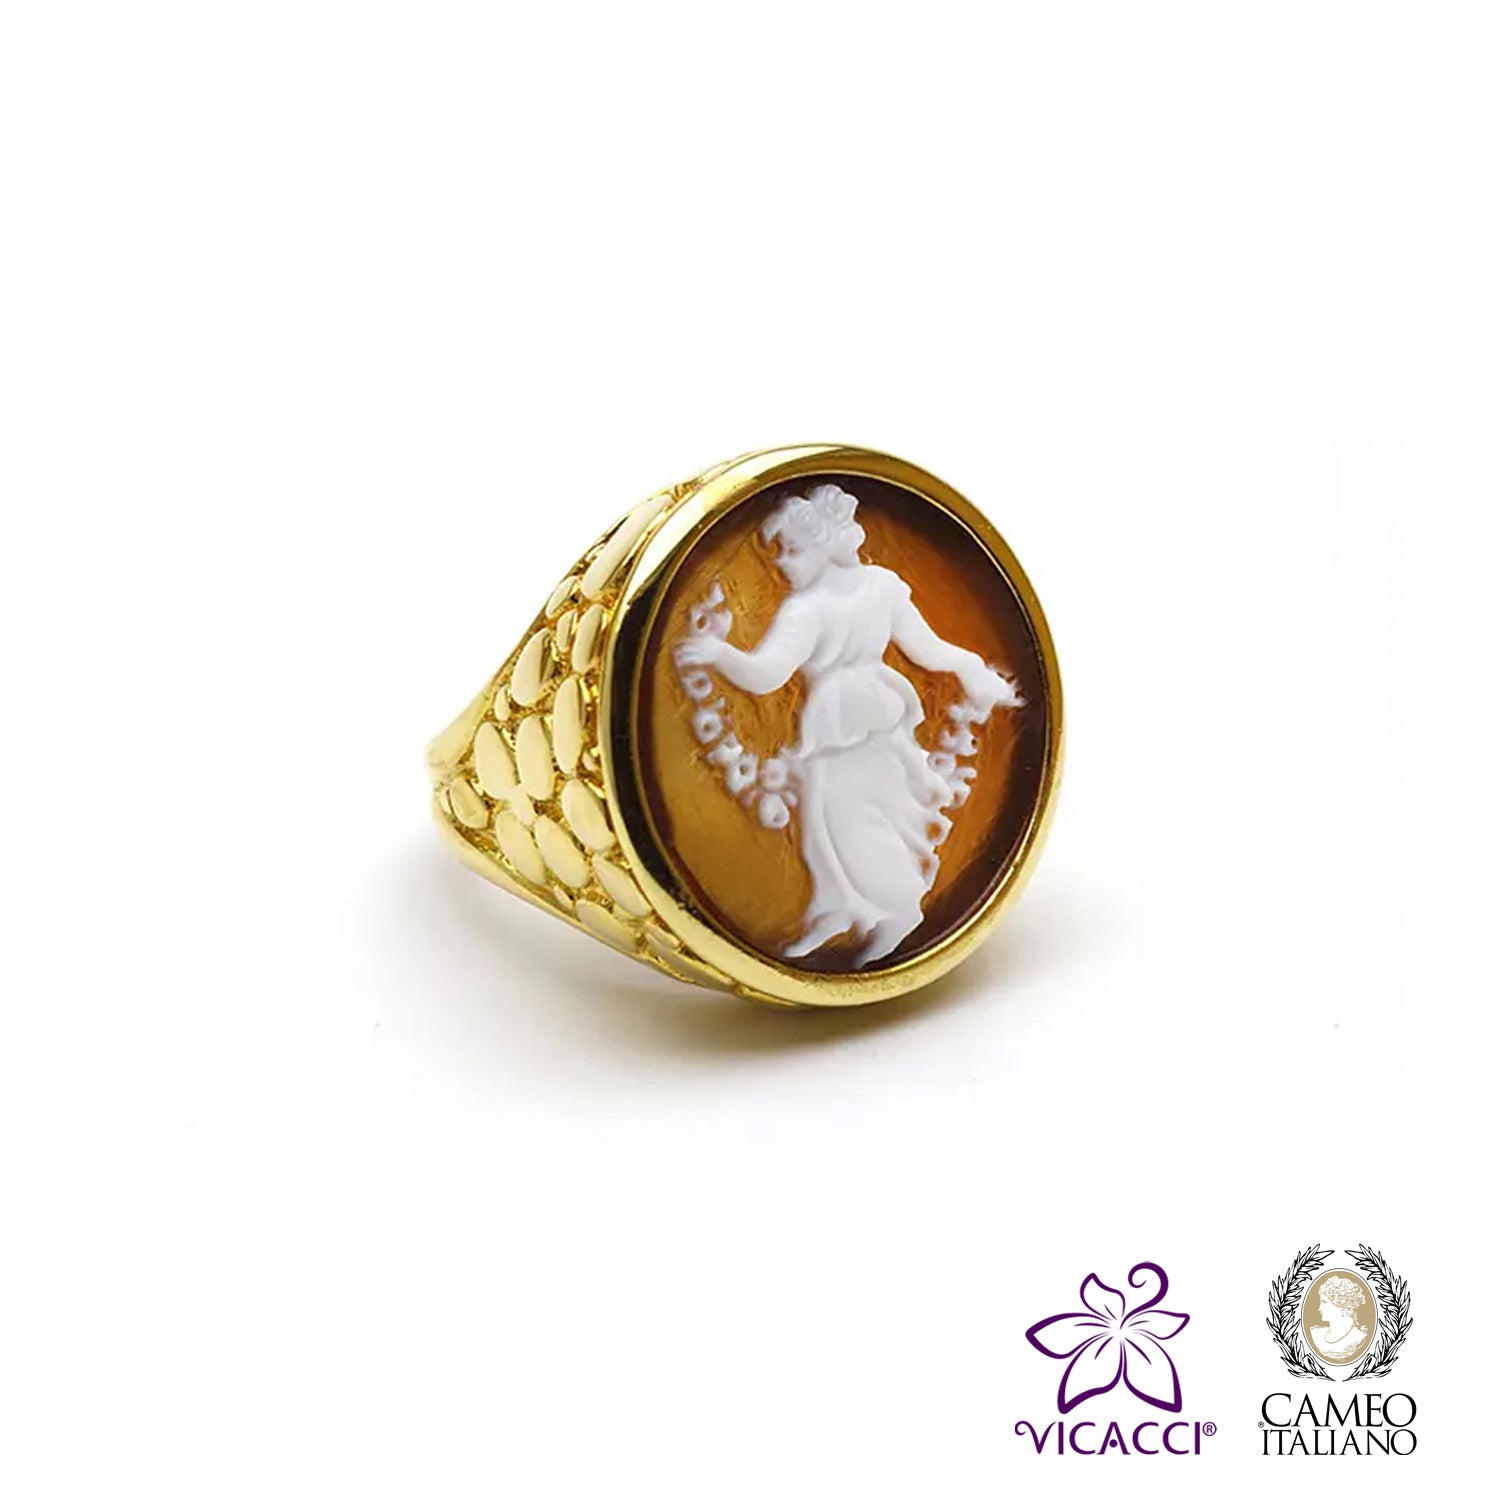 Cameo Italiano, A27 Ring , Rose Gold Plated Sterling Silver